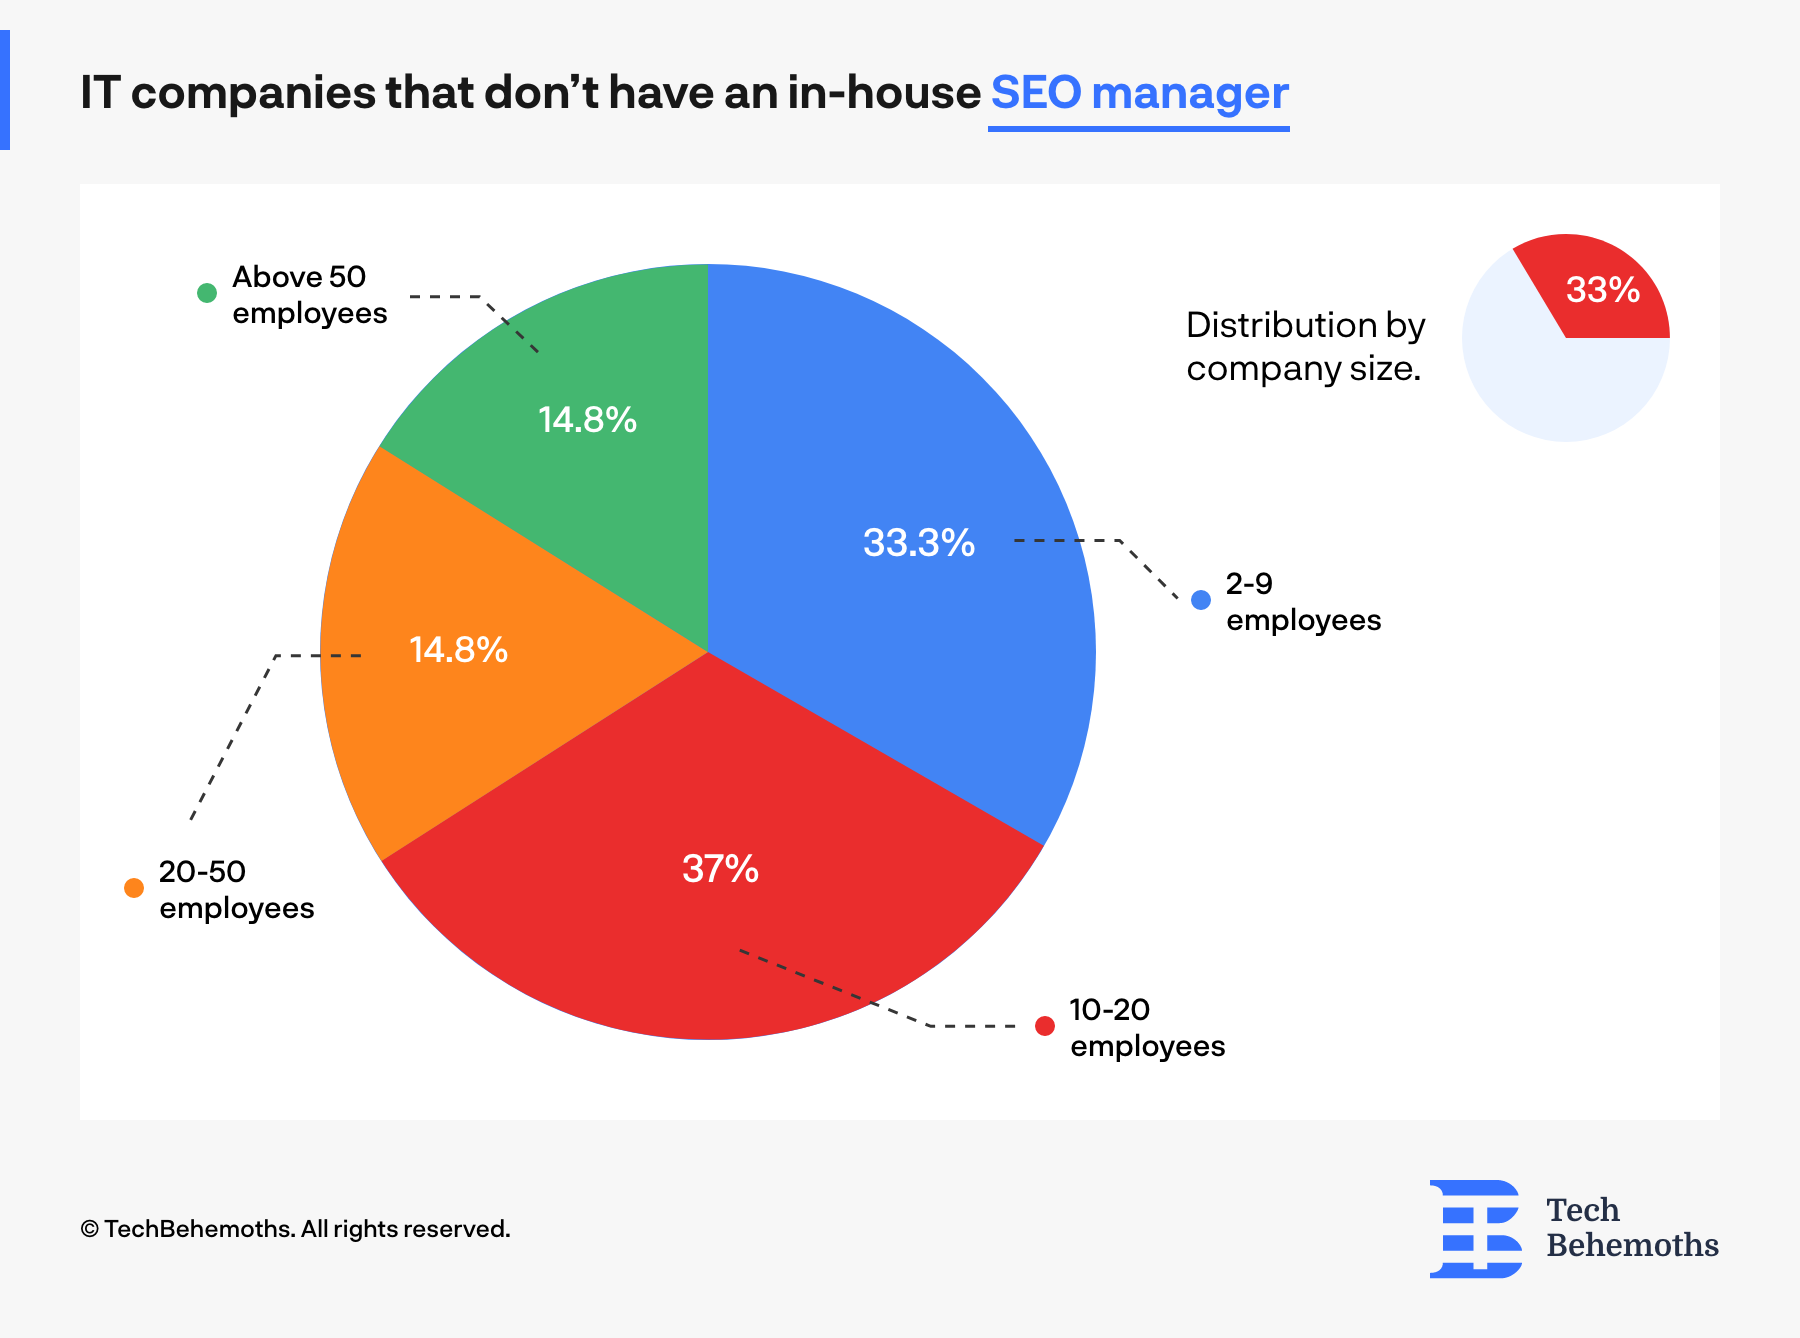 most of IT companies that don't have an seo manager have between 2-9 employees